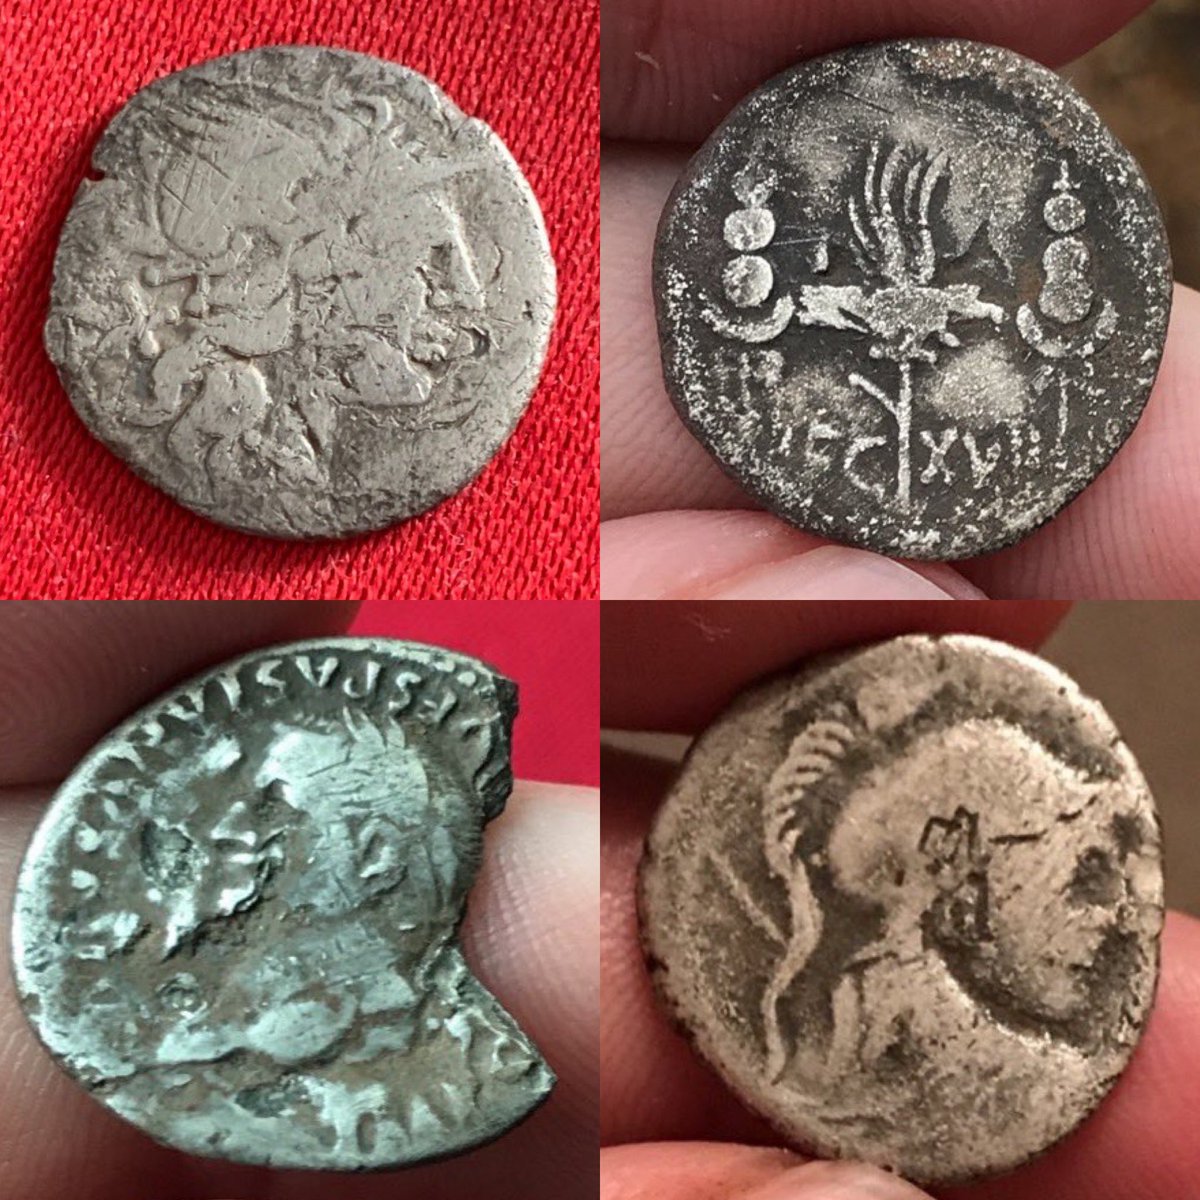 ..this one was most probably minted while Mark Antony & his legions we’re in Greece in 32/31 bc. Bottom right is another denarius of the Roman republic. This example was minted in Rome in 46 bc. Bottom left is a denarius of the Emperor Vespasian, minted in Rome in 77/78 ad...